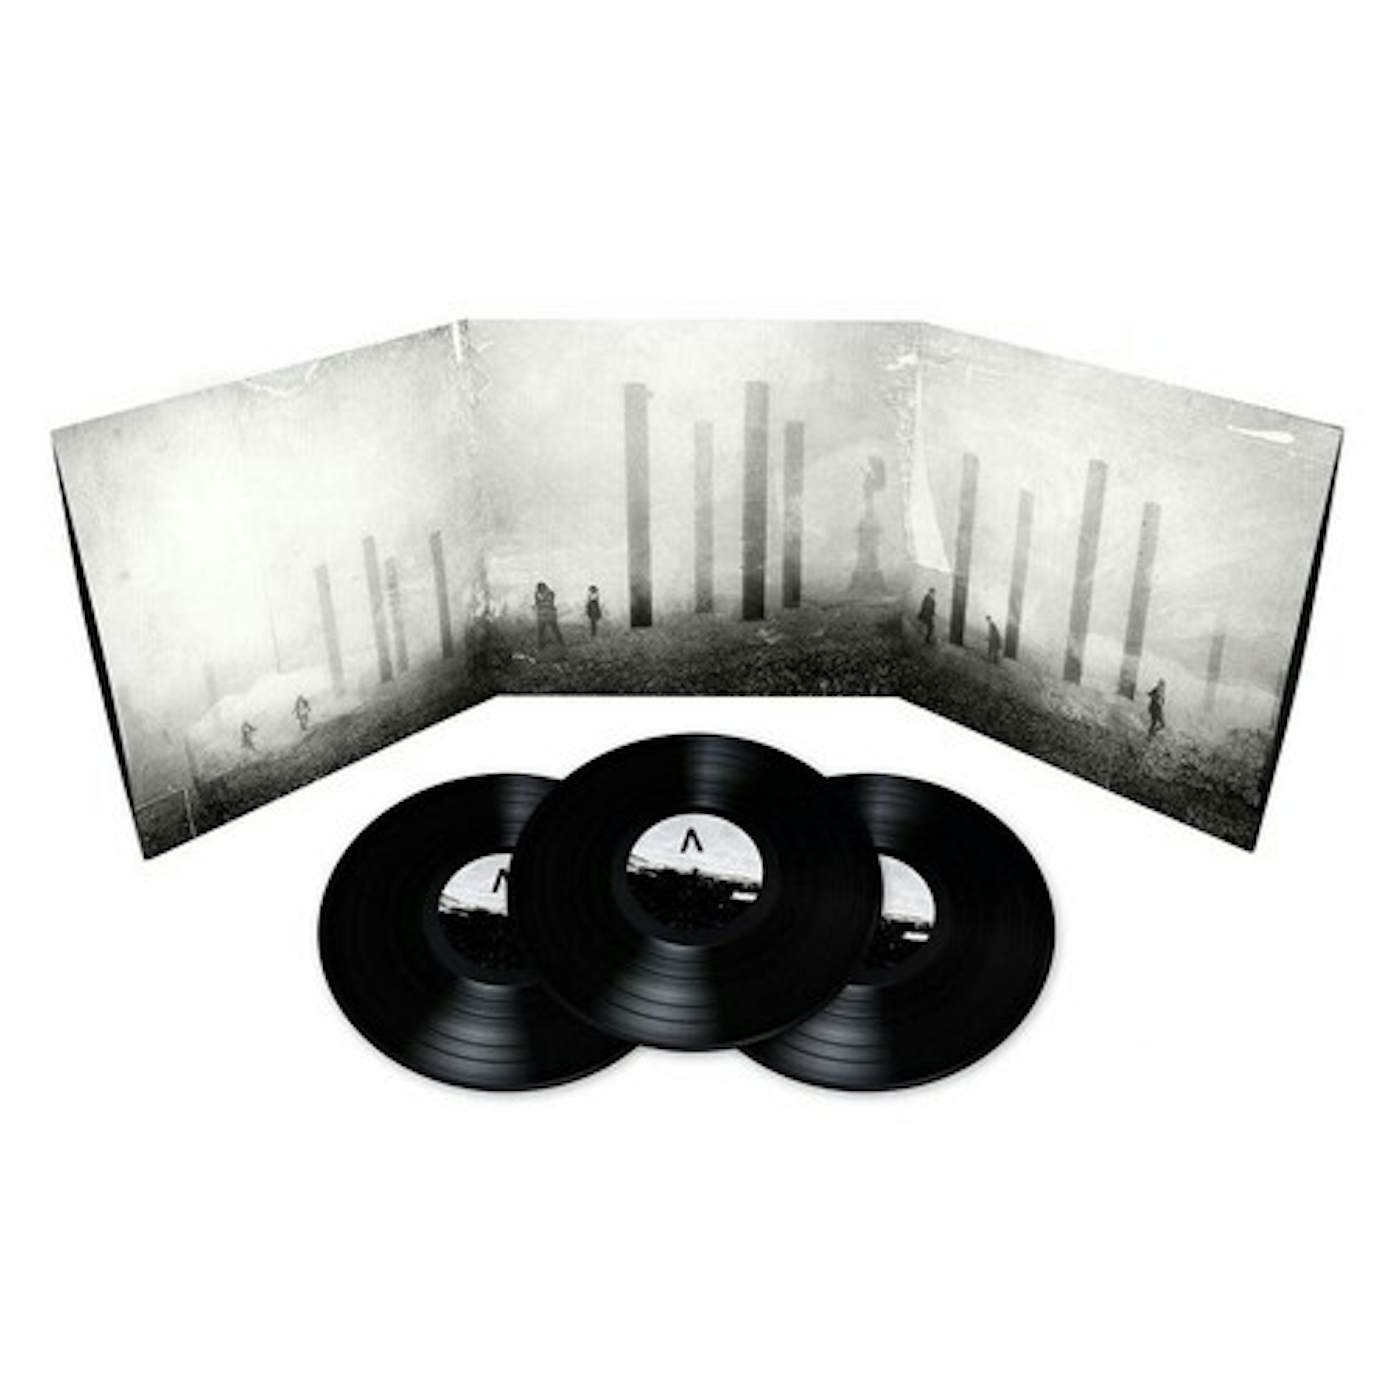 Archive CALL TO ARMS & ANGELS (3 LP Vinyl Record)